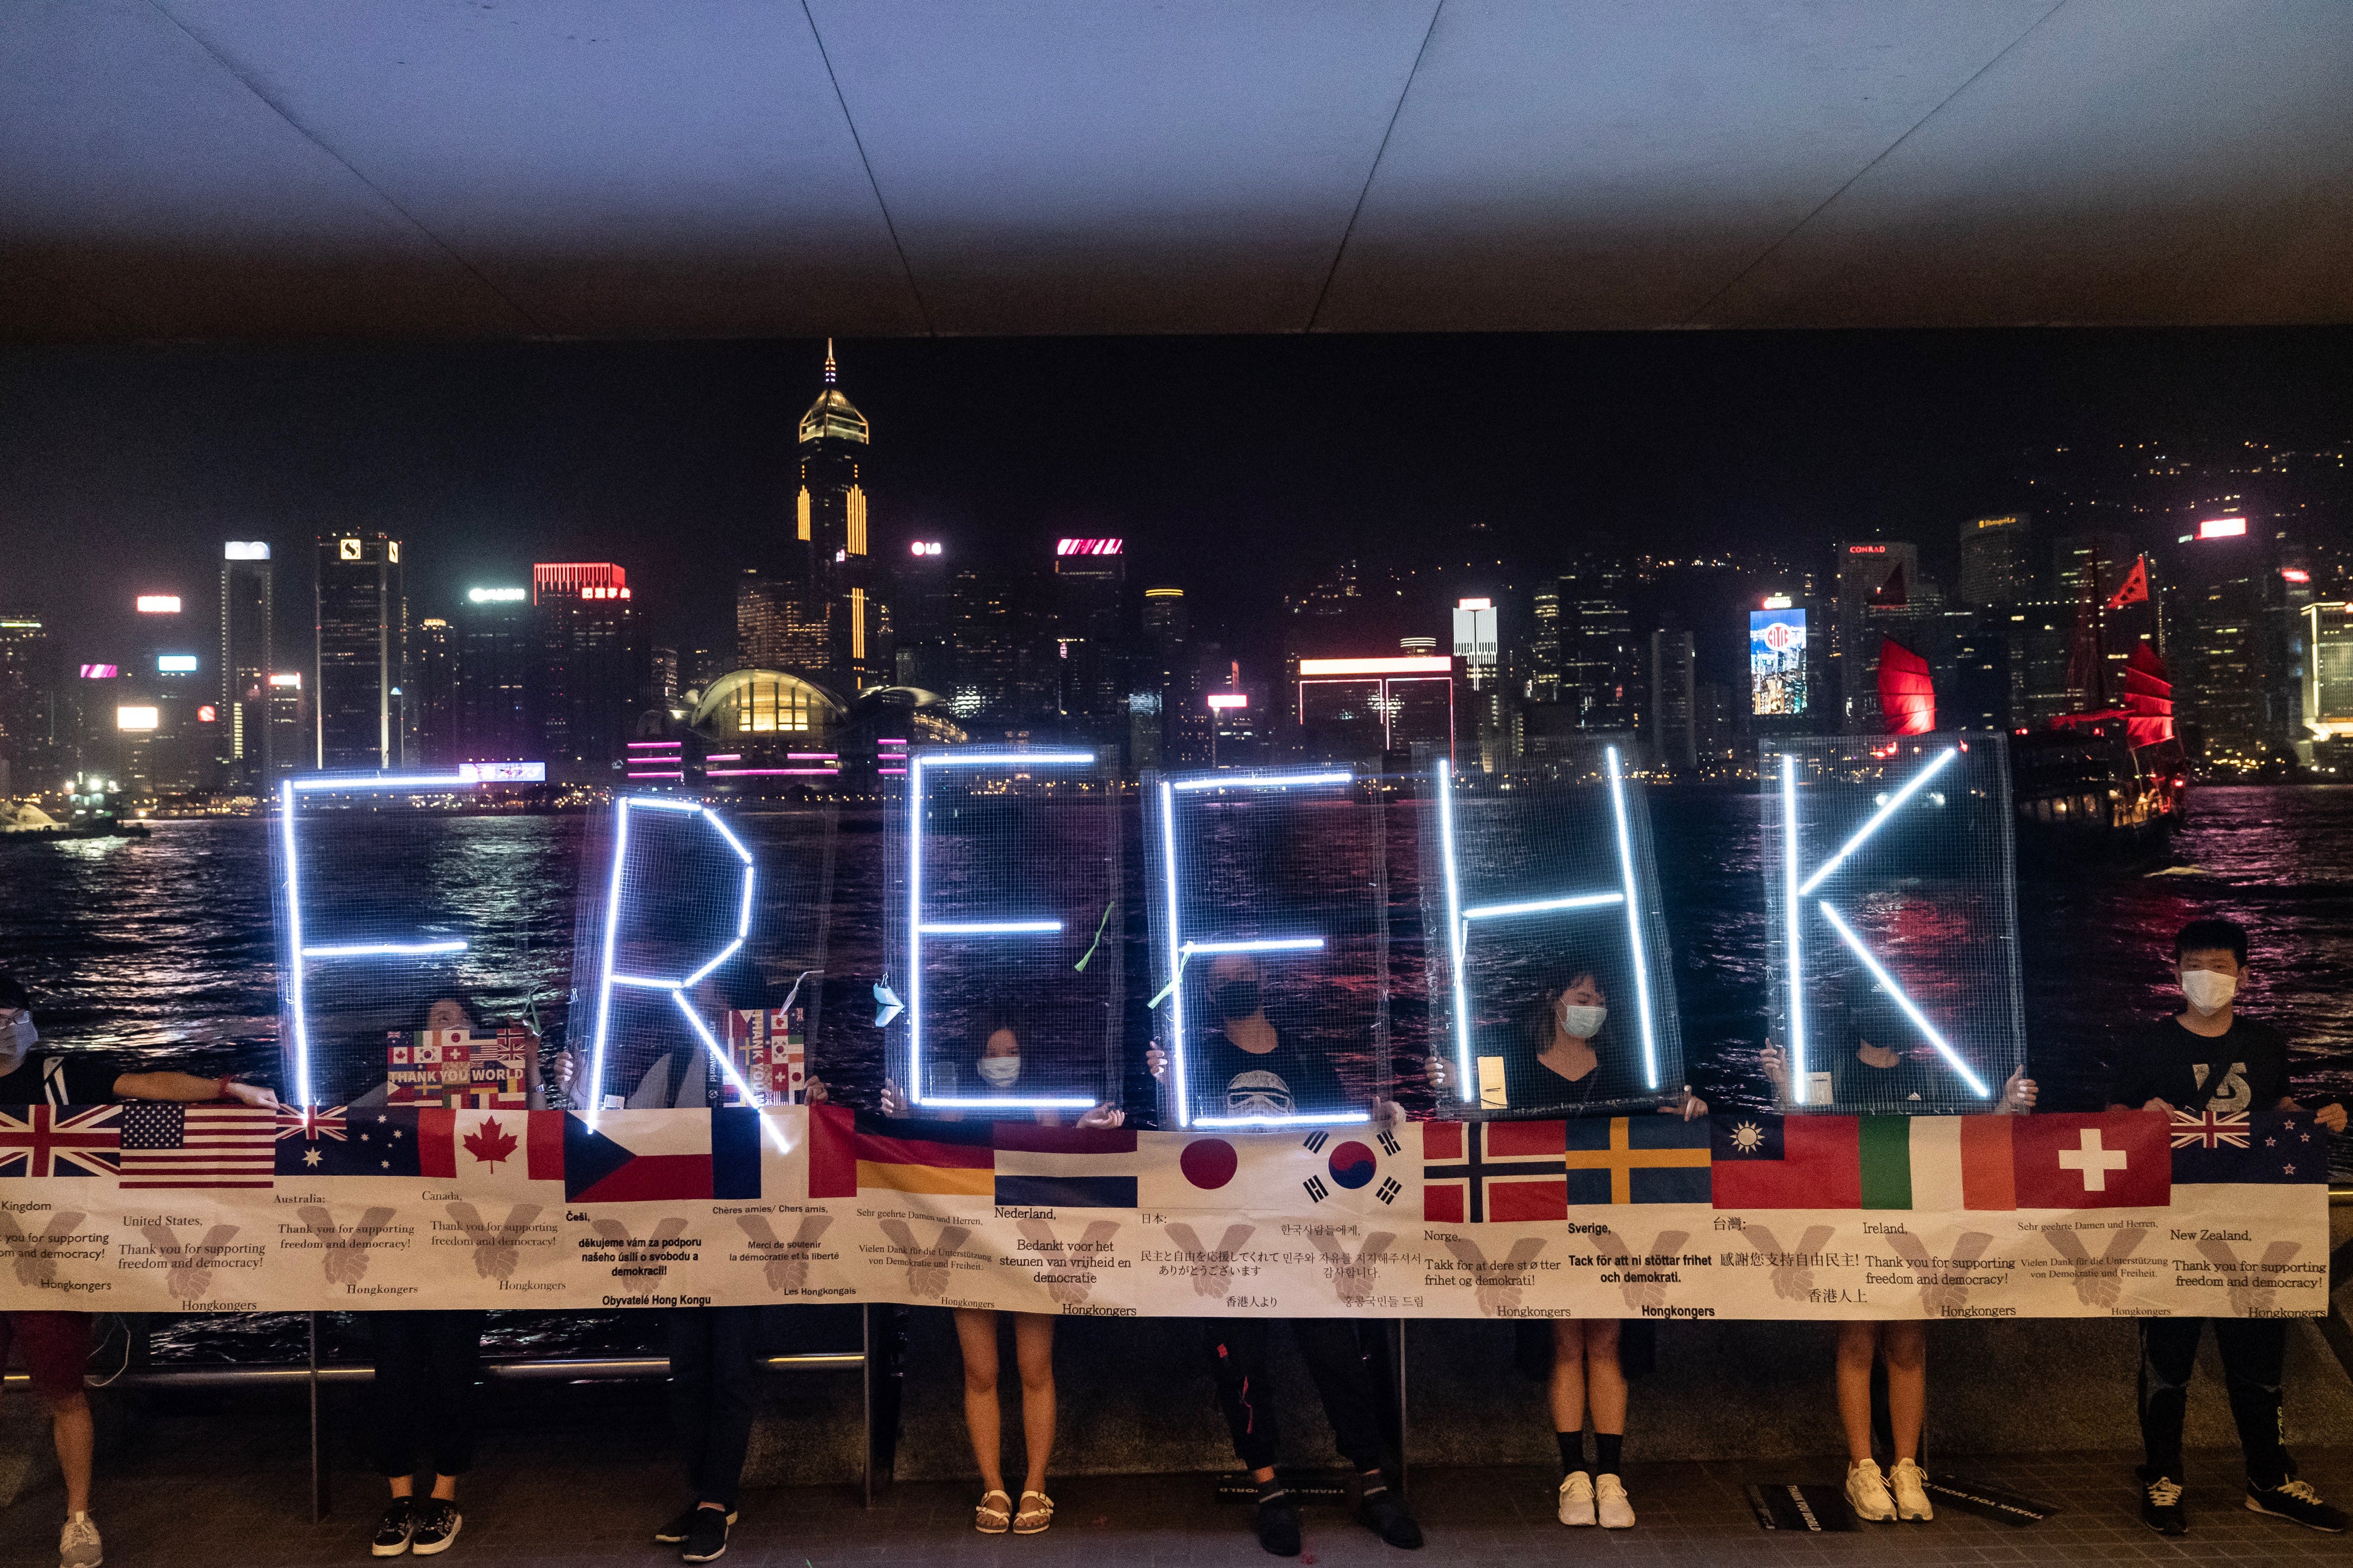 Pro-democracy protesters hold up a ‘Free HK’ LED sign during a demonstration on 30 September, 2019 in Hong Kong, China.